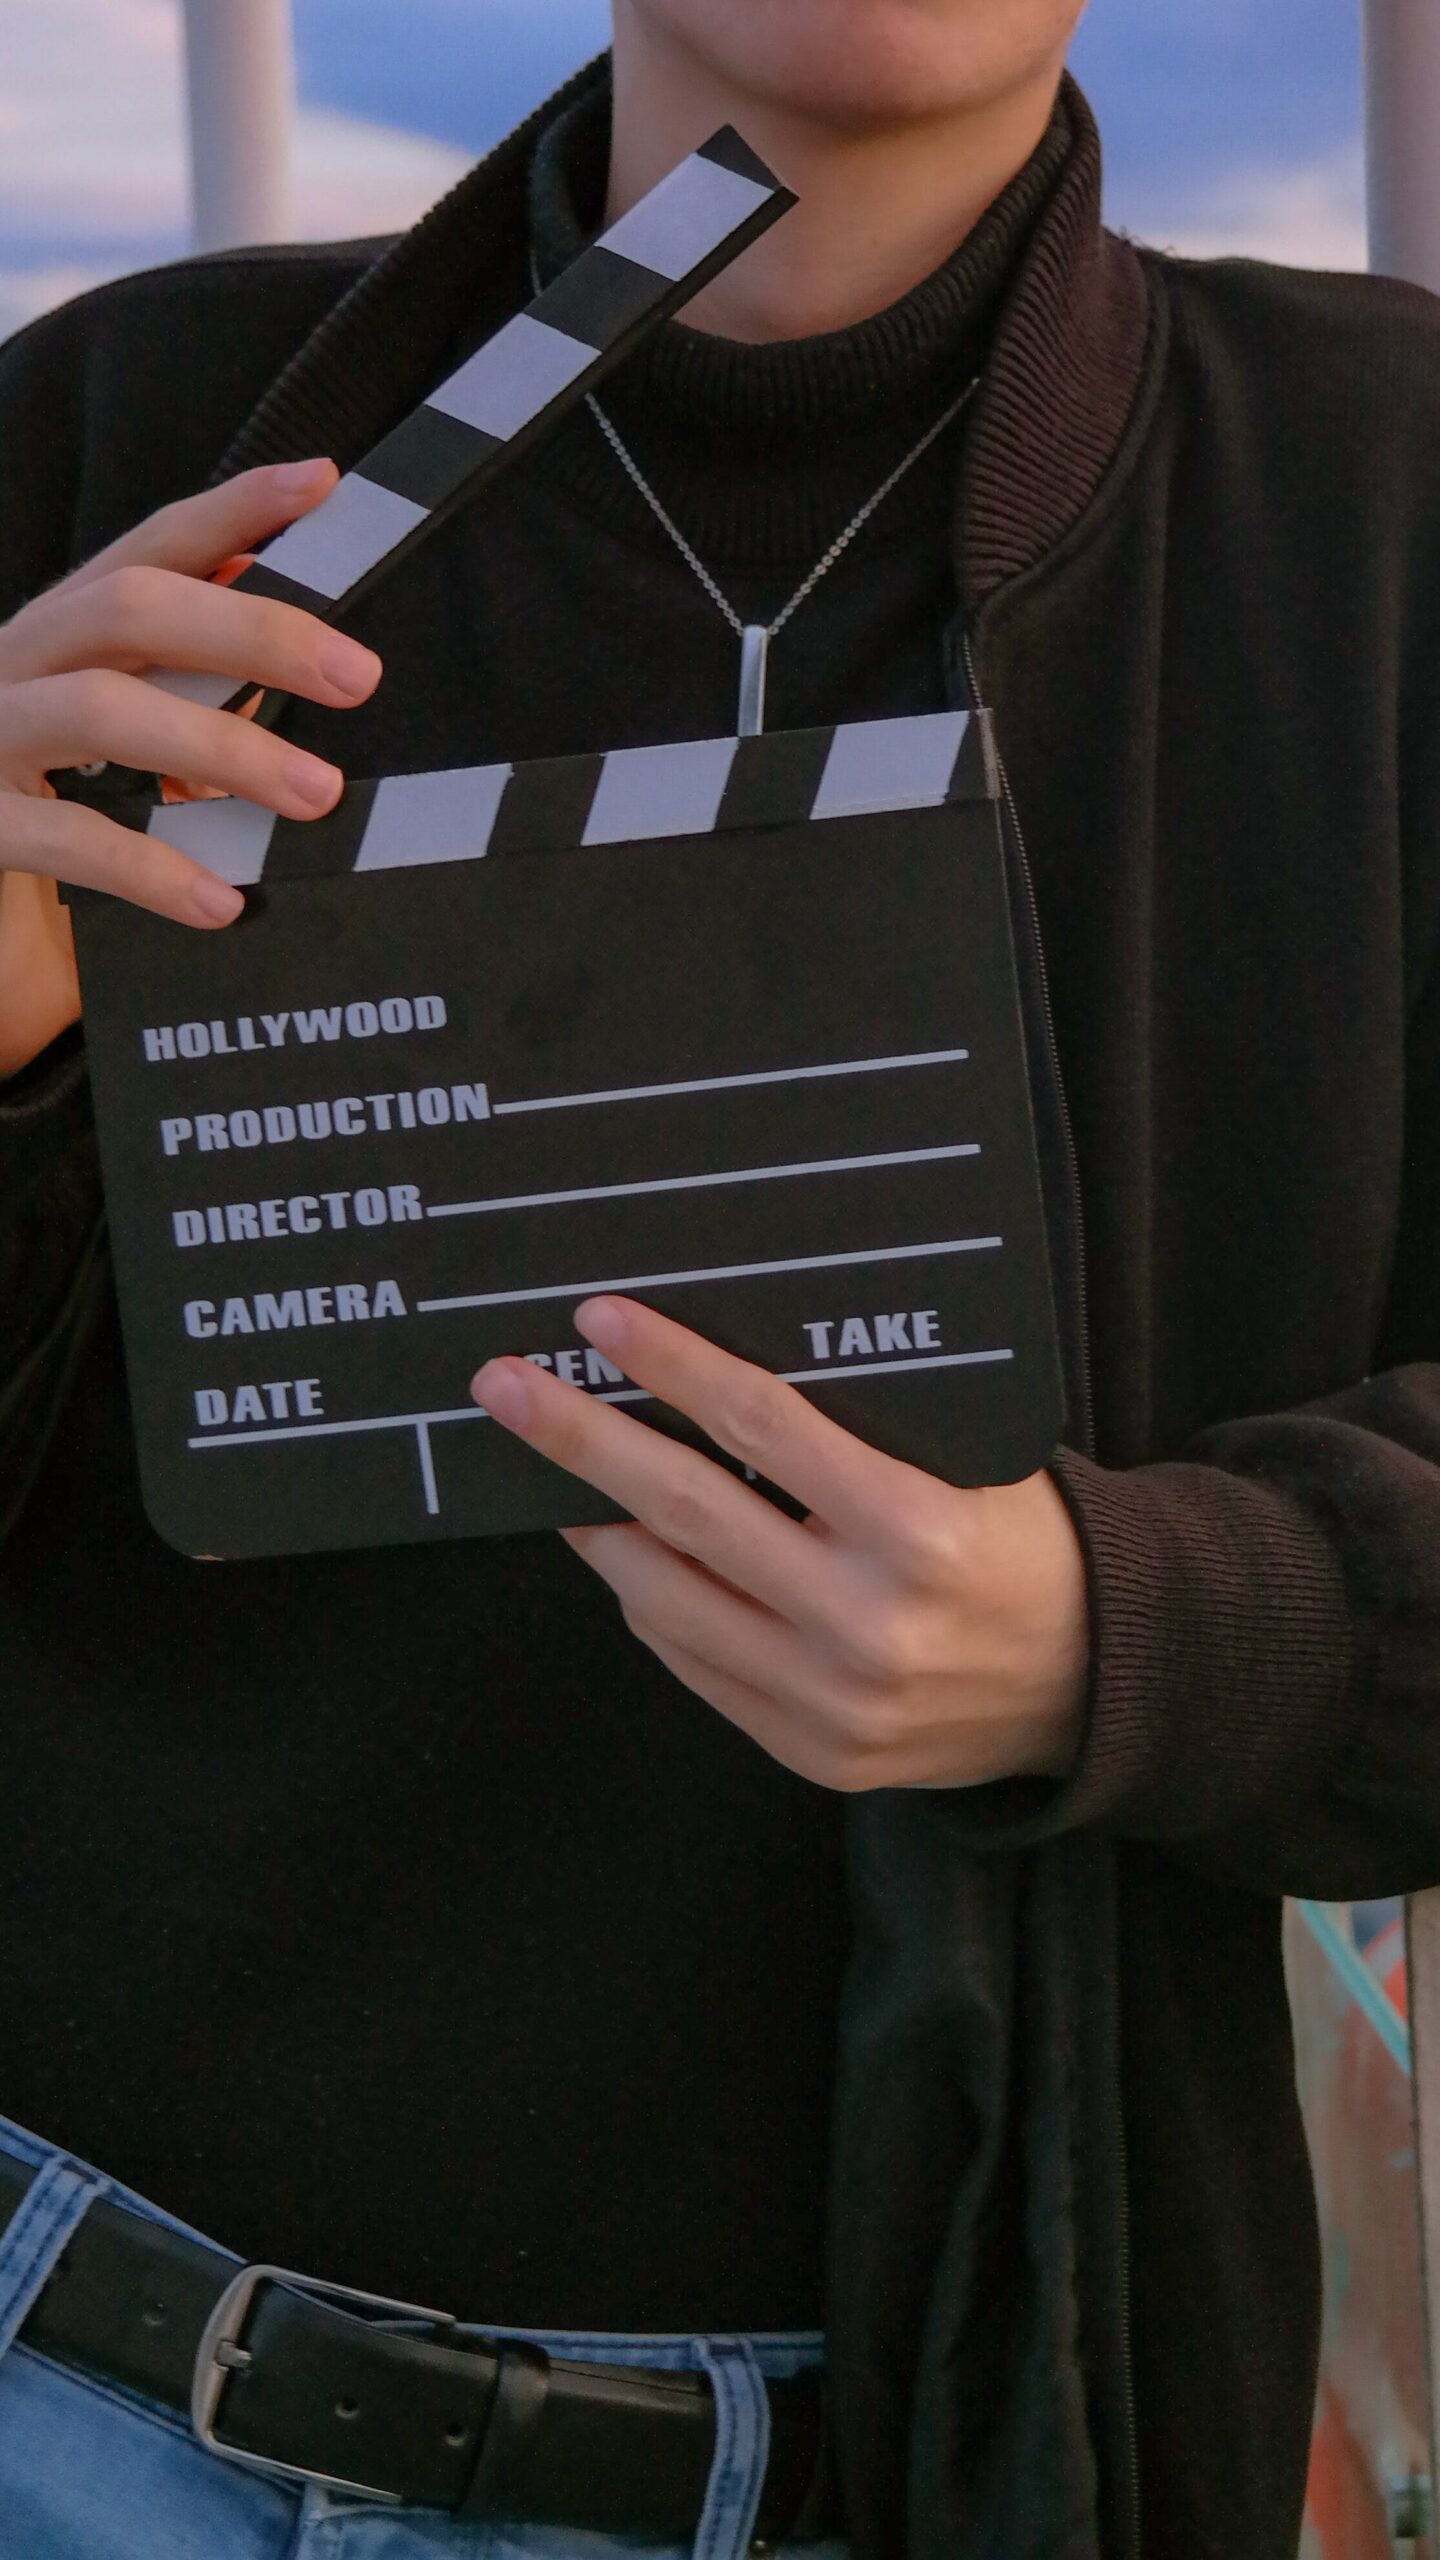 A film clapperboard, depicting Chris farley movies and the addiction he struggled with